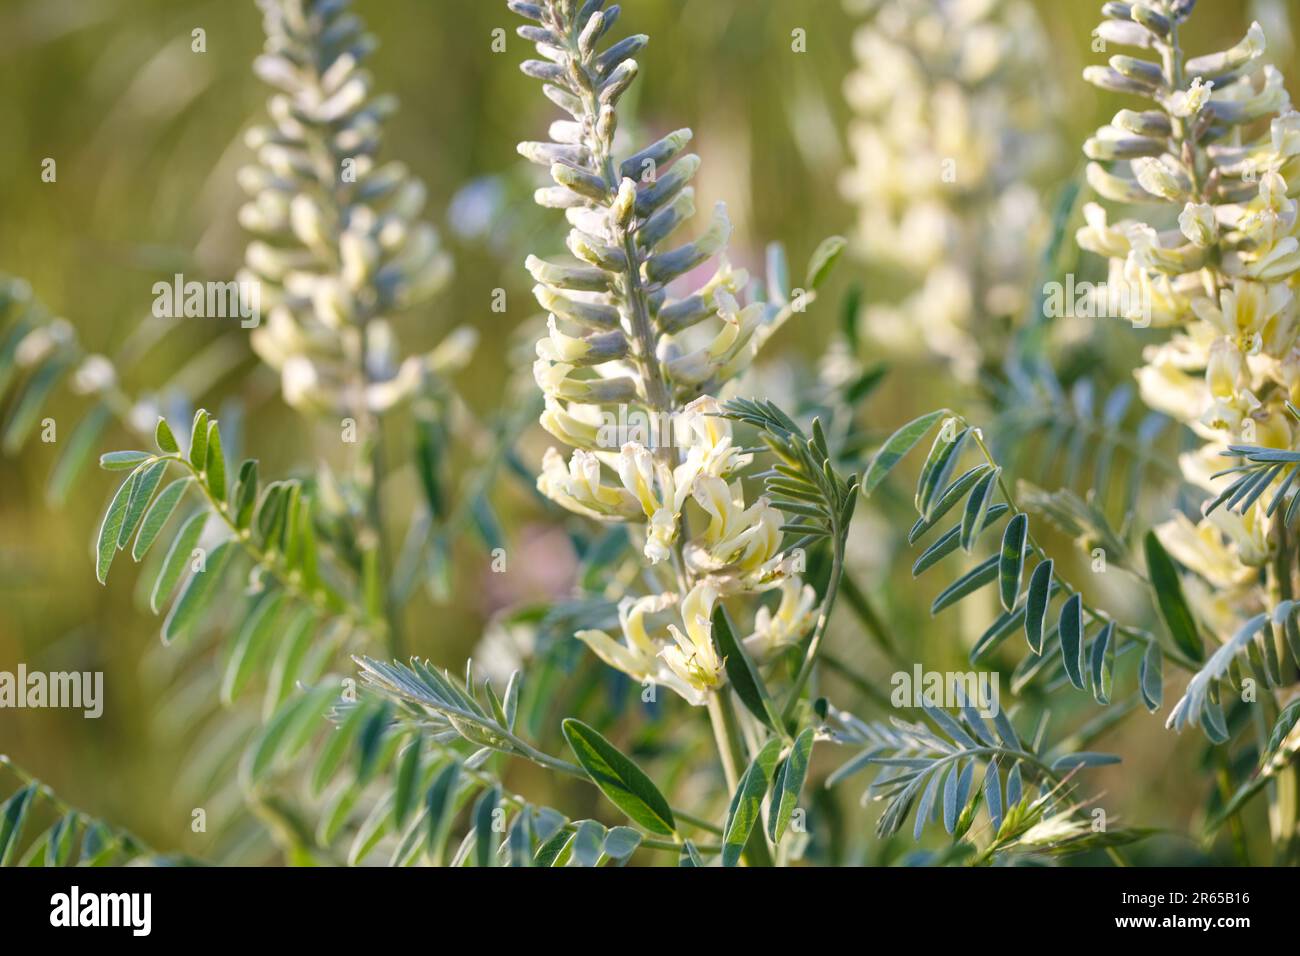 Sophora foxtail, Sophora alopecuroides, Sophora vulgaris, perennial medicinal herb. A species of the genus Sophora in the legume family Fabaceae Stock Photo